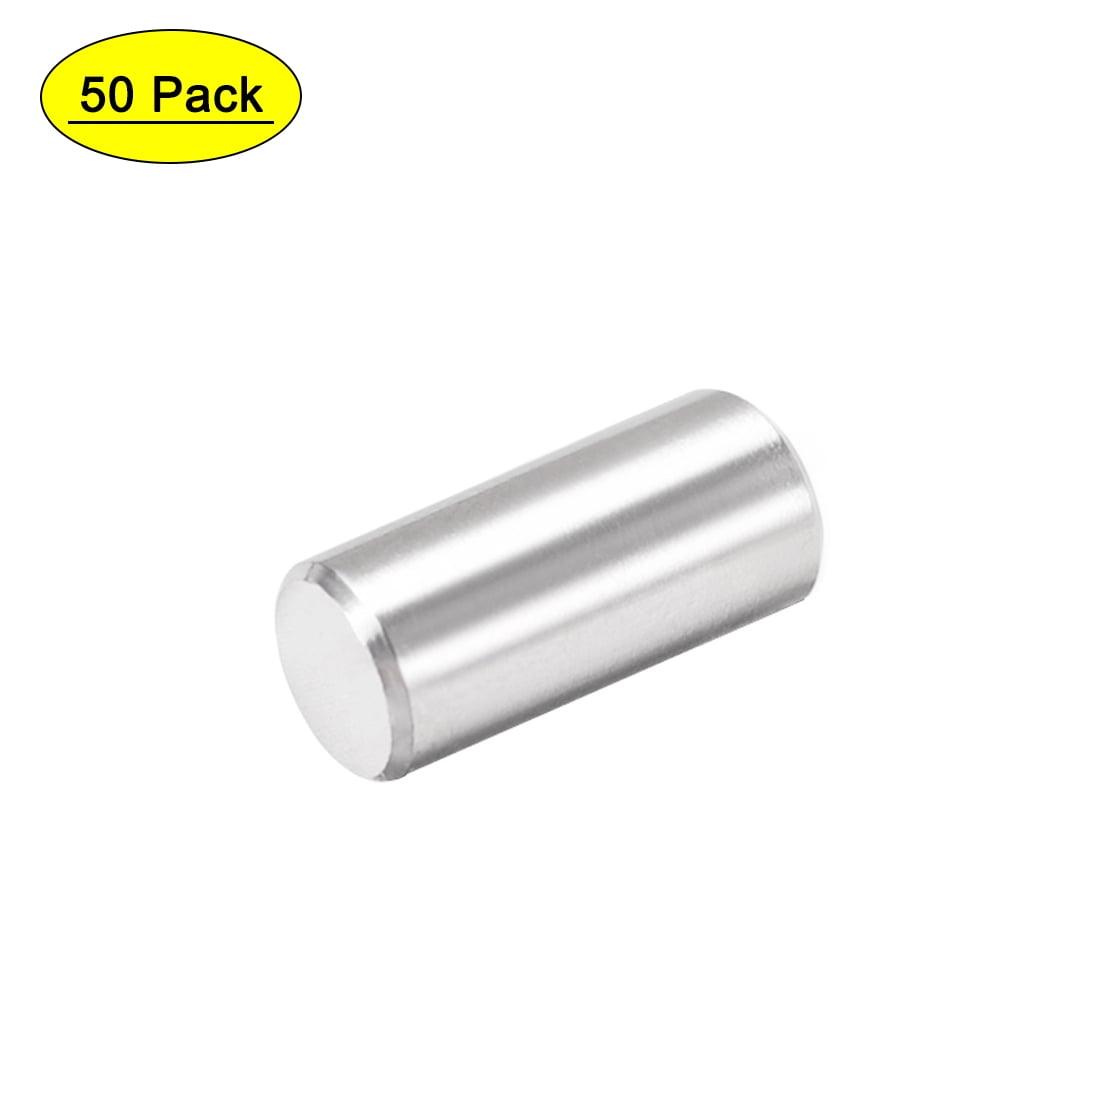 18-8 Stainless Steel Metric Dowel Pins M2.5 Dia x 6 mm Length 100 Pieces 